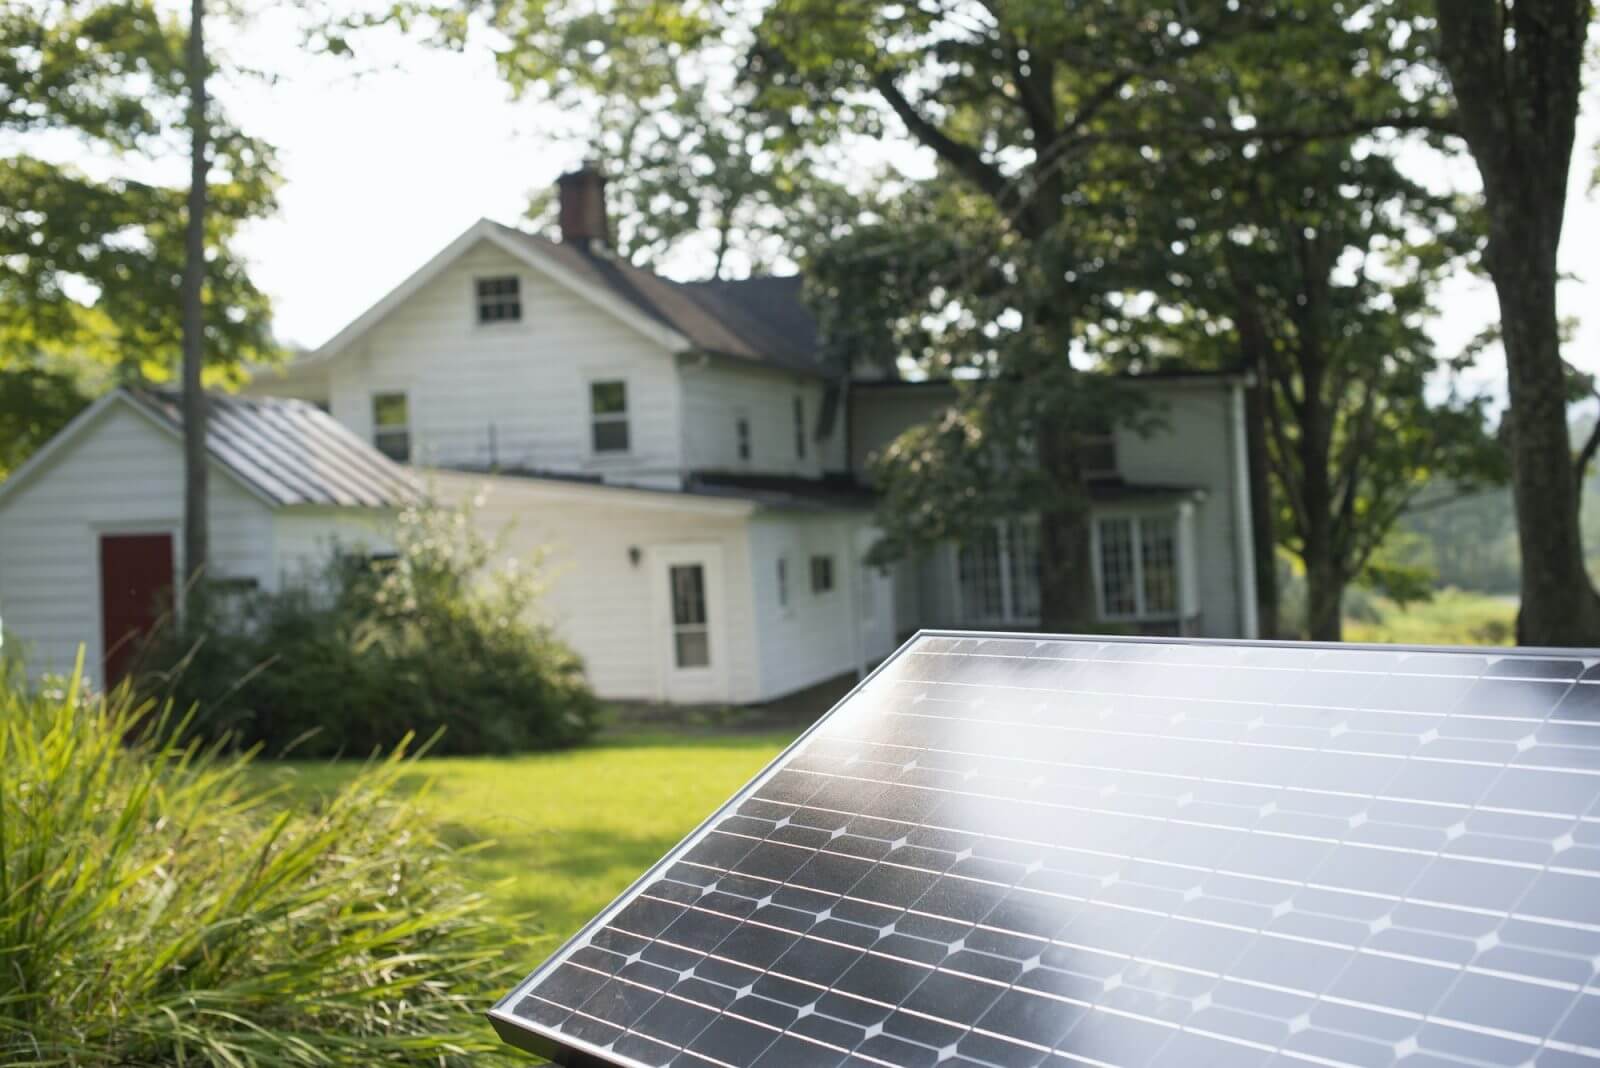 10 Ways To Make Your Home More Energy-Efficient